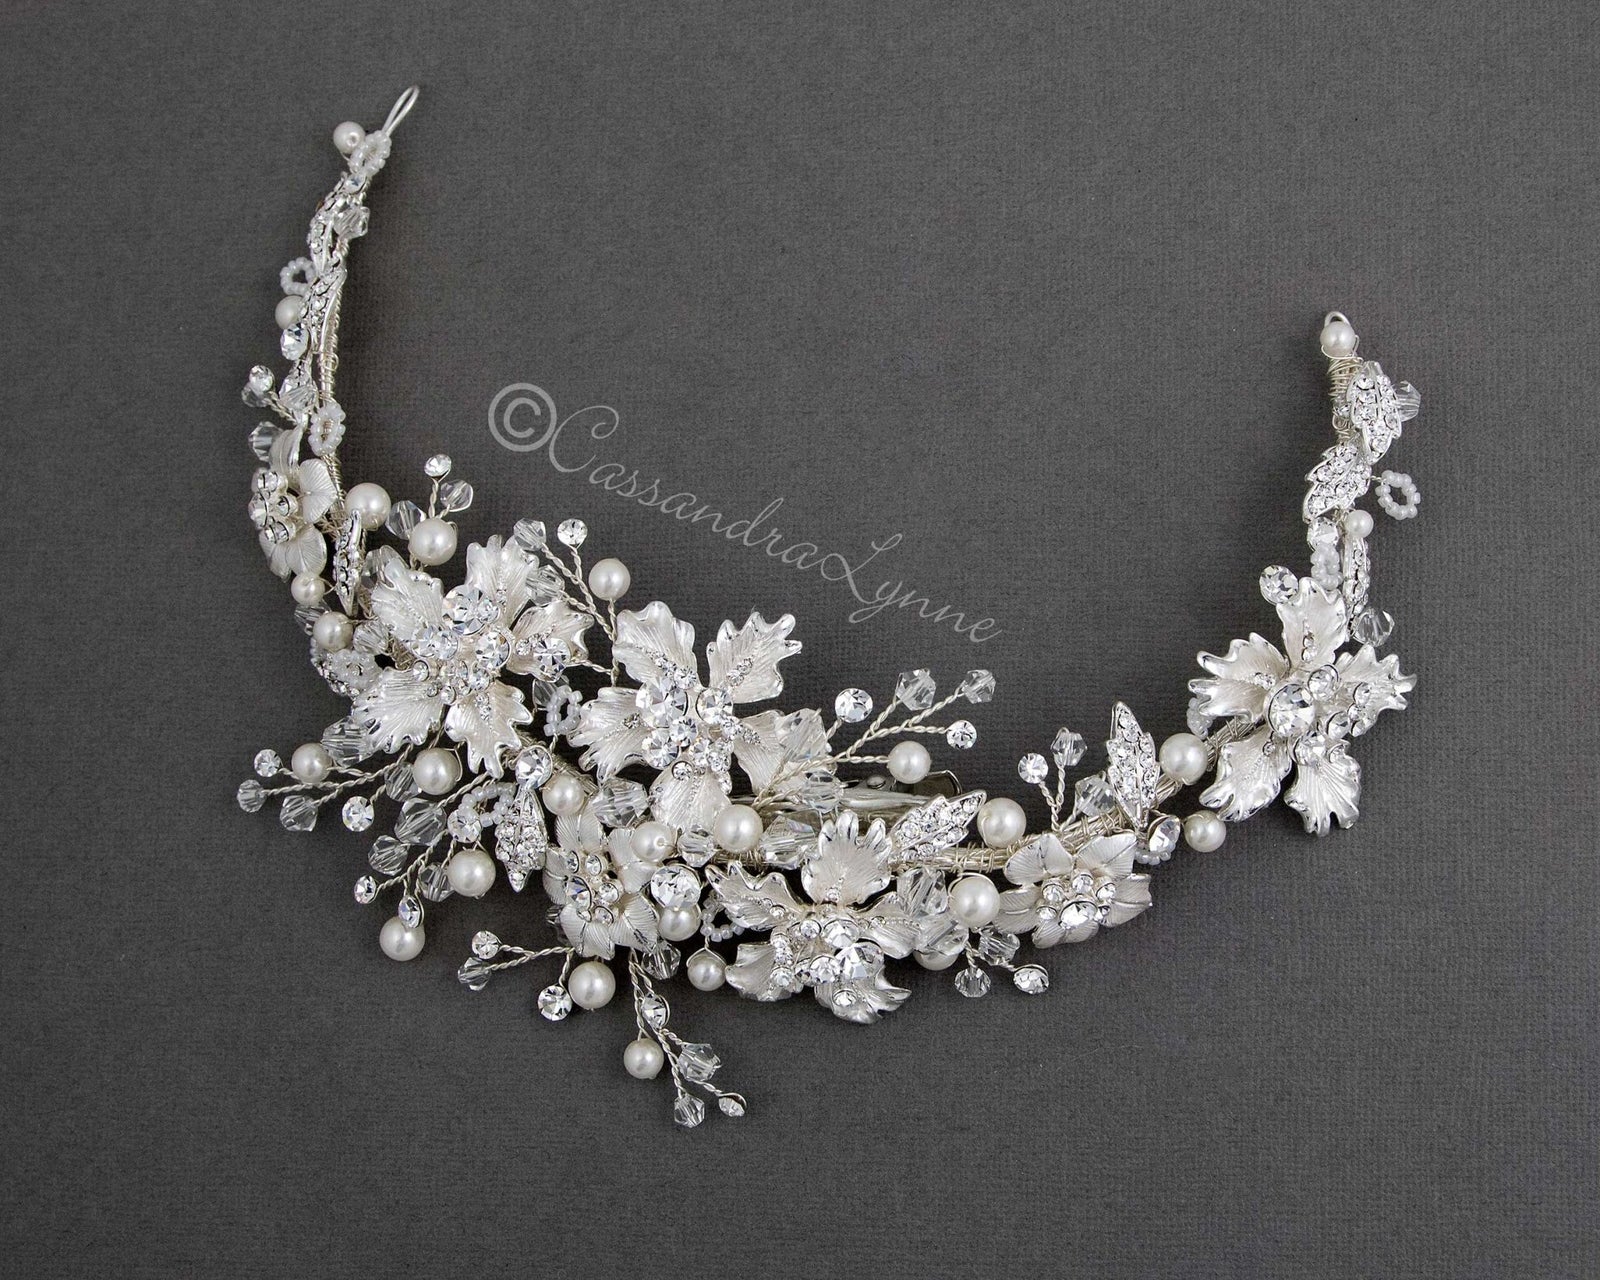 Bridal Headpiece with Frosted Flowers Pearls and Crystals - Cassandra Lynne